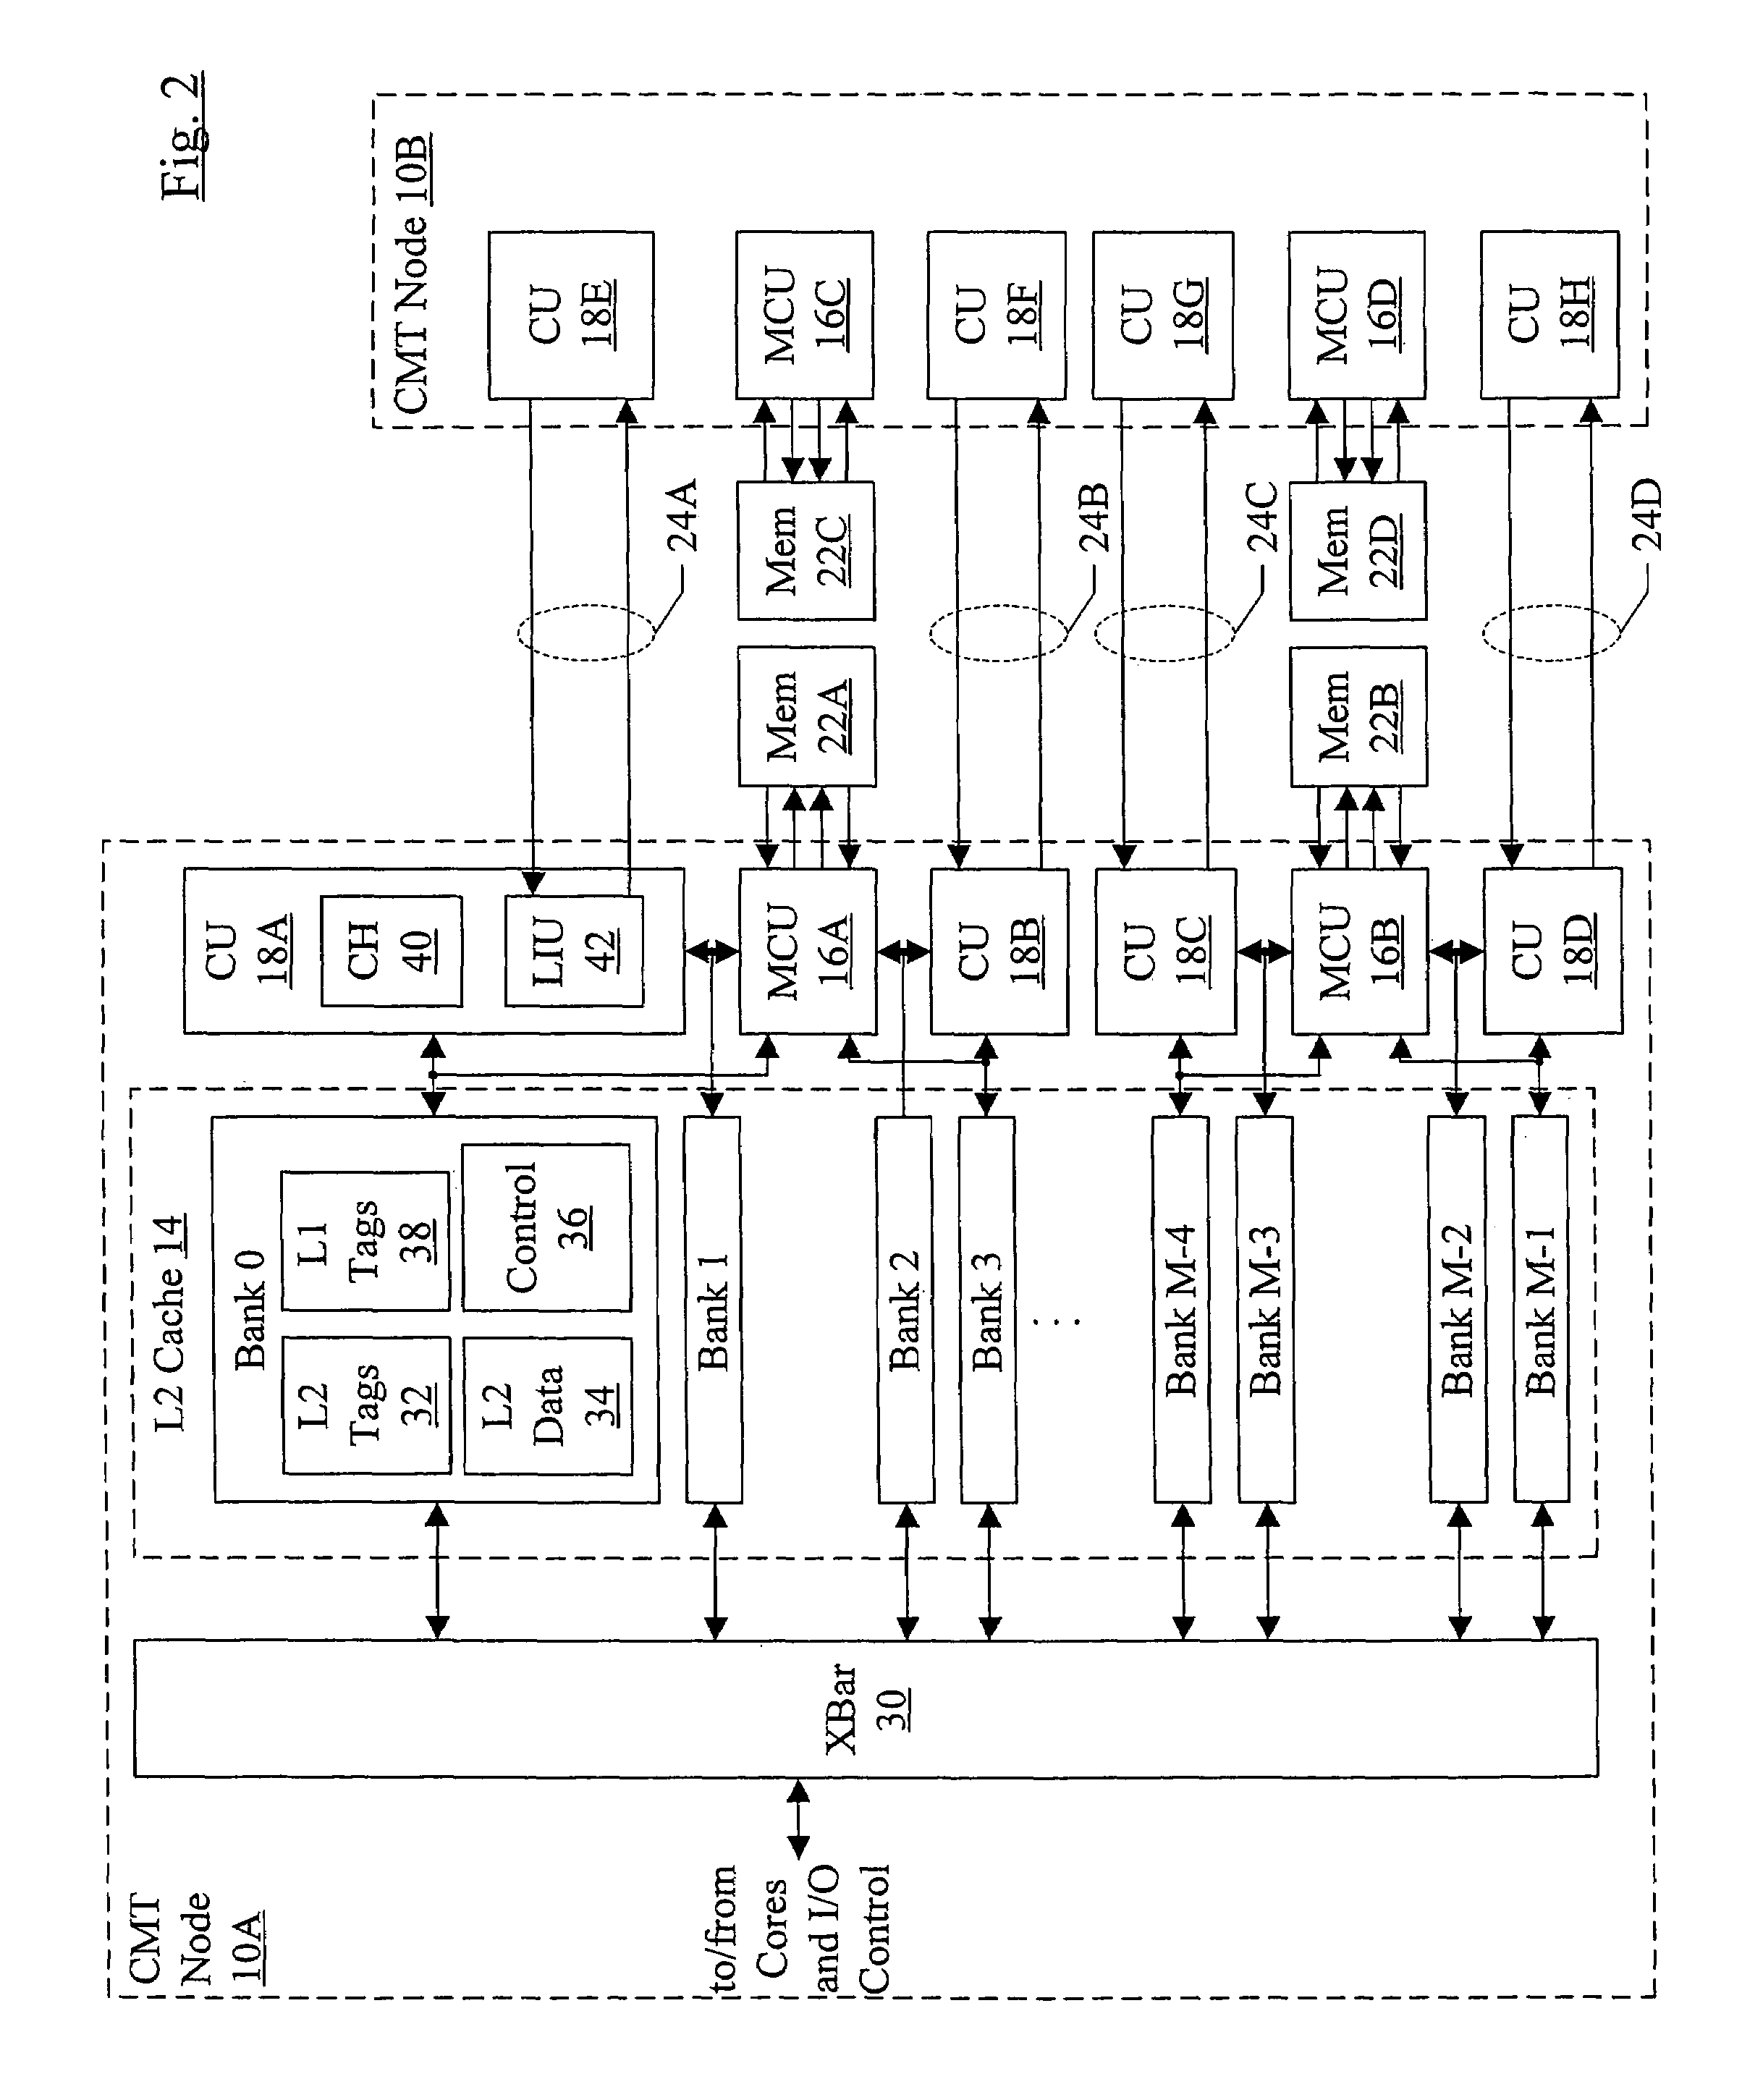 Multi-socket symmetric multiprocessing (SMP) system for chip multi-threaded (CMT) processors